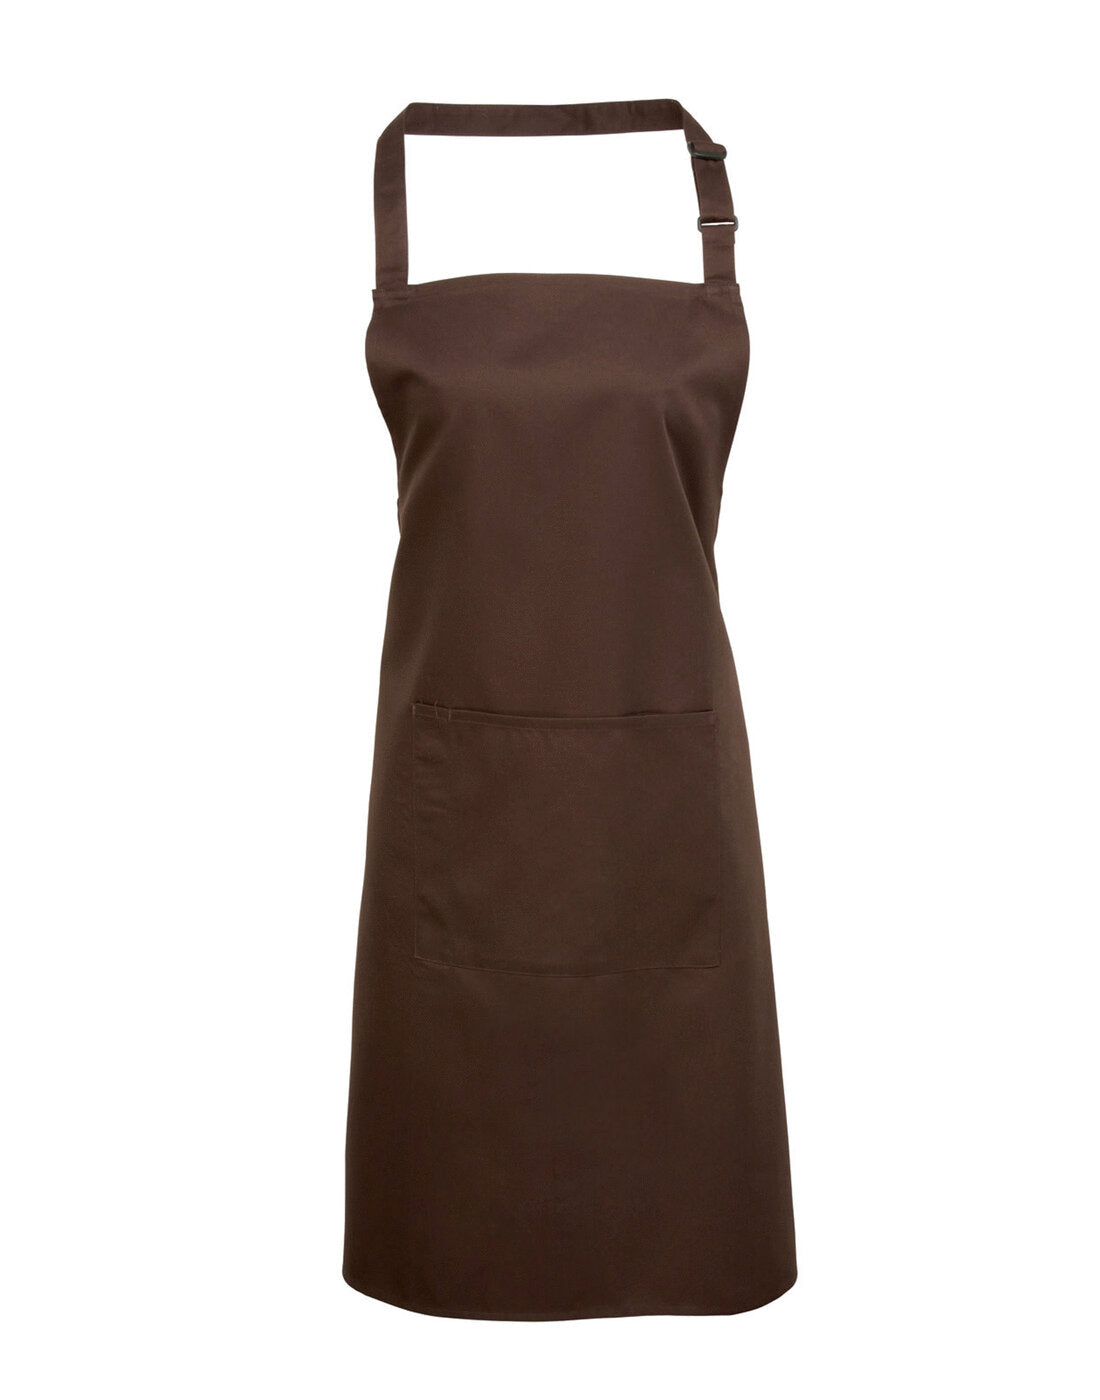 Personalised Premier Colours Collection Hospitality Bib Apron with Pockets